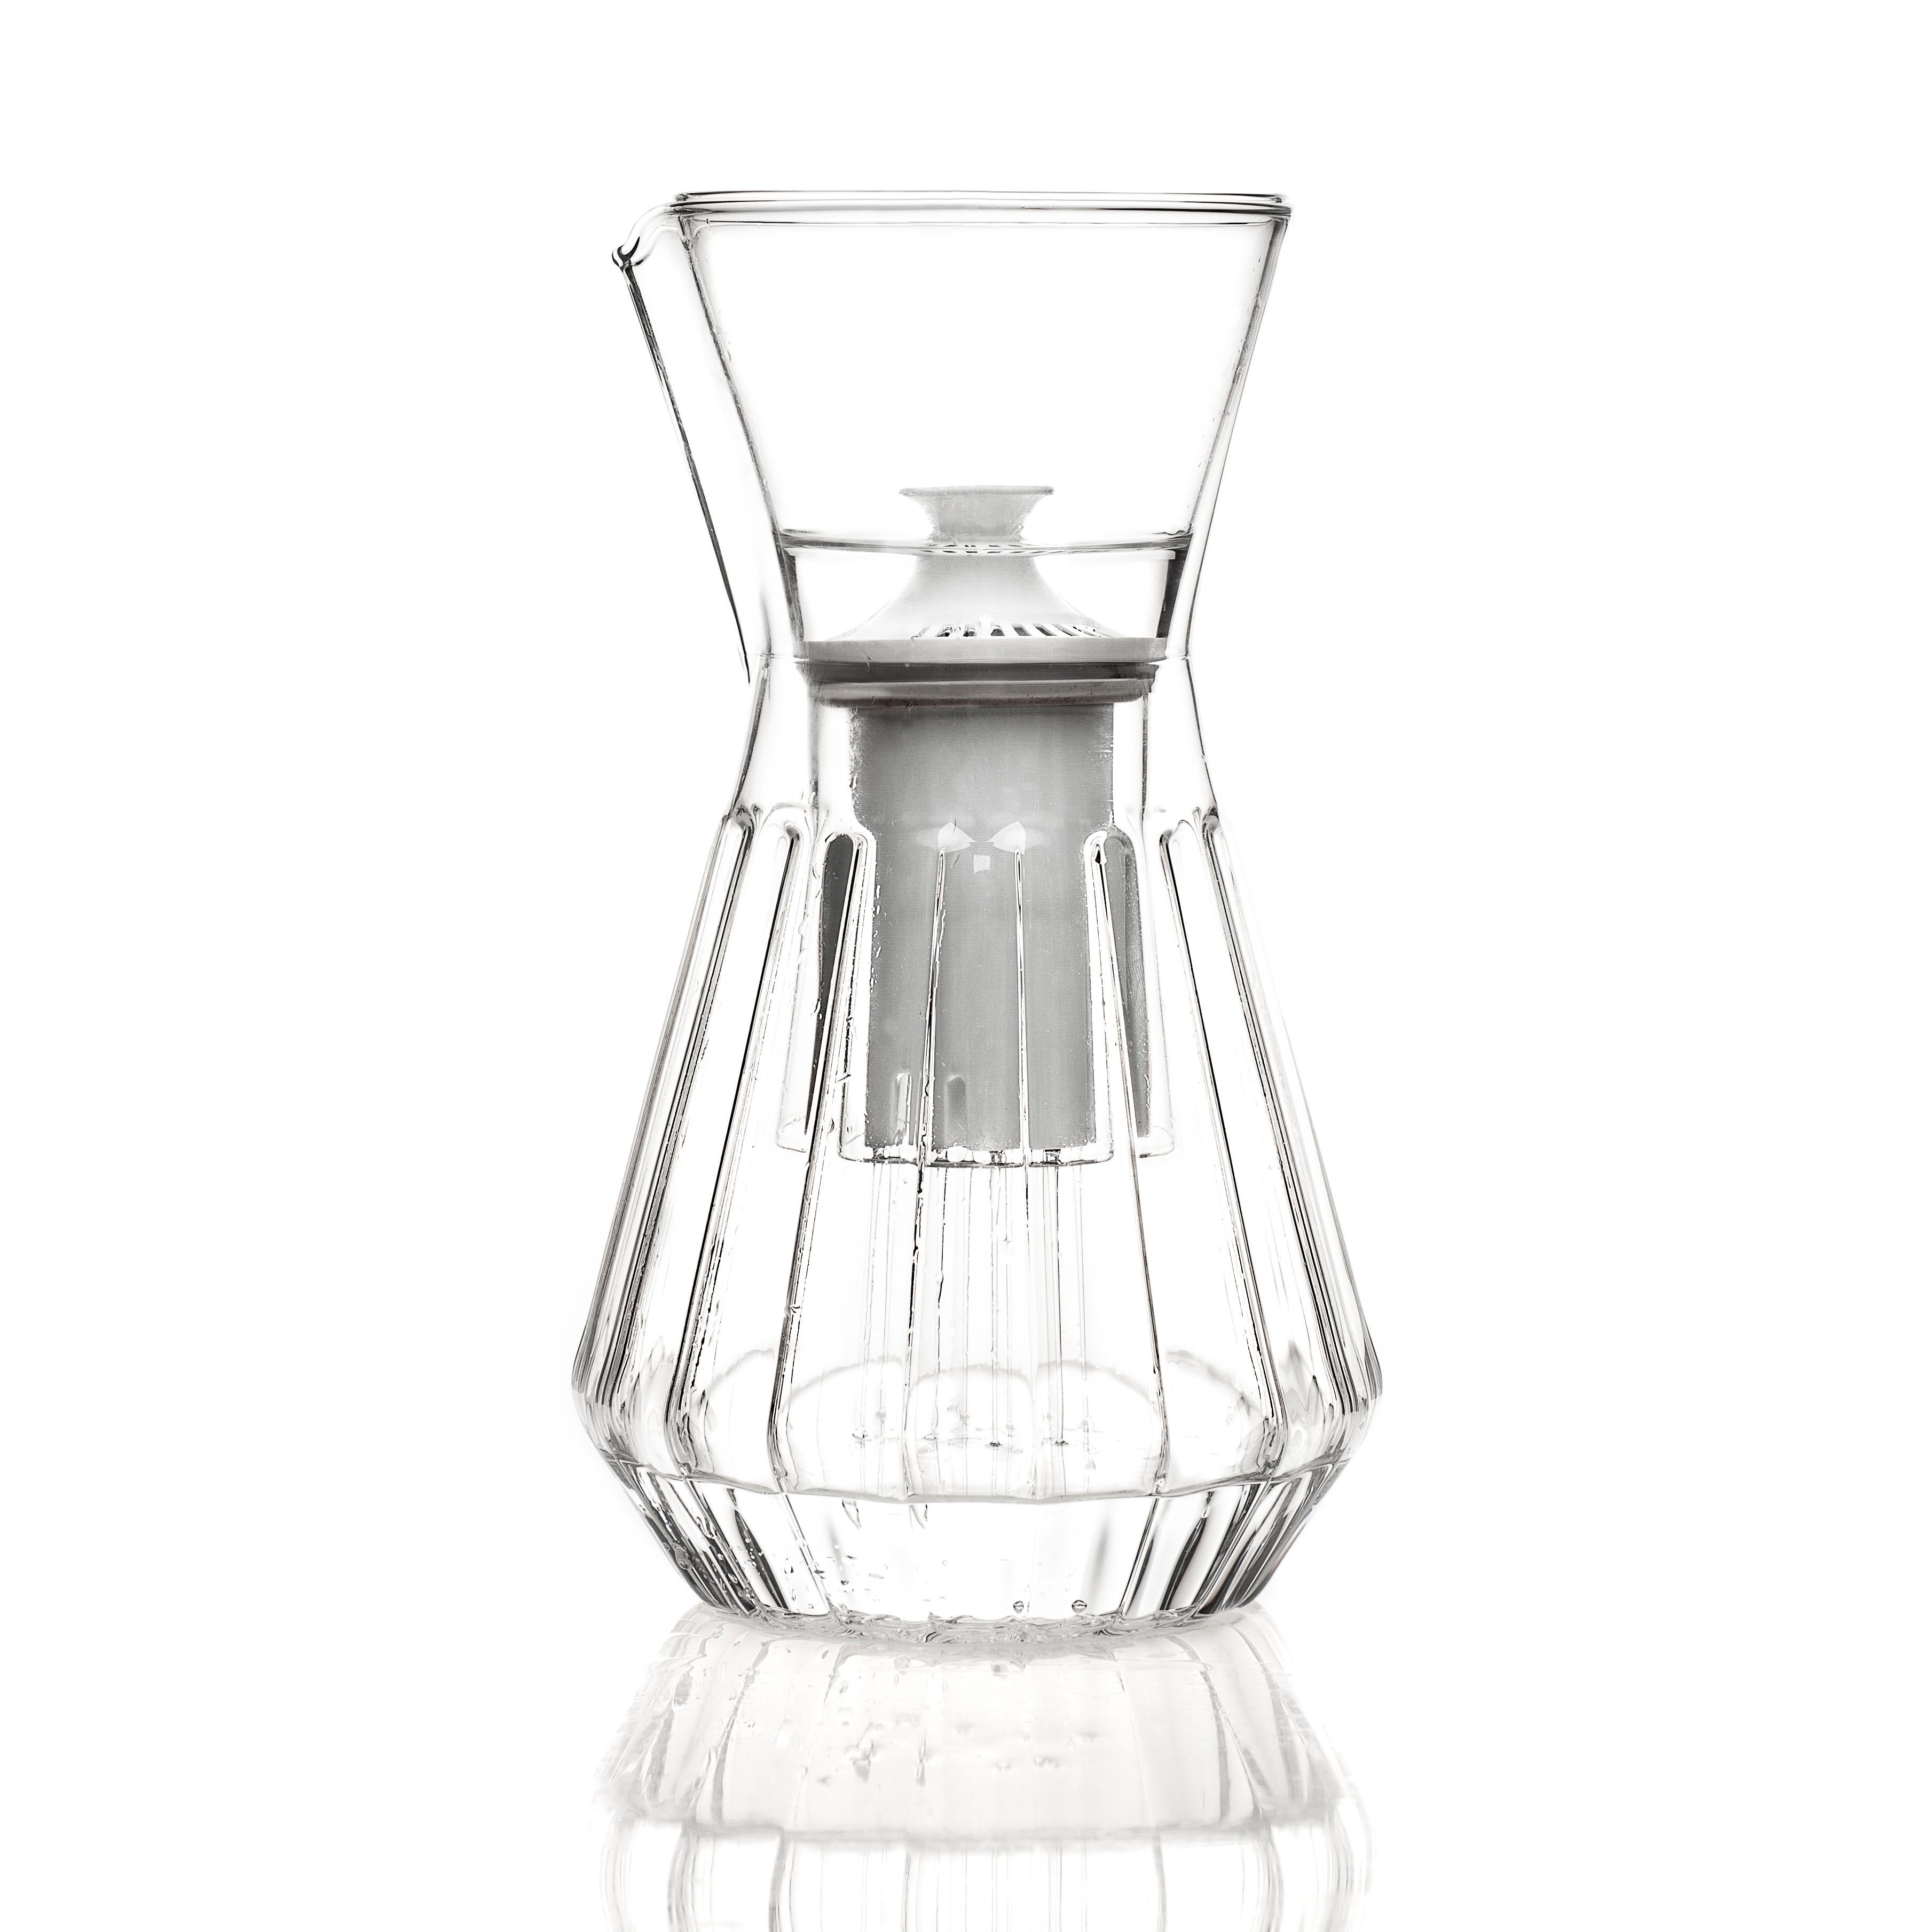 Finding the beauty in a simple, everyday object is one of the joys of life. Be it left out on your counter or table the contemporary clear glass fluted talise water carafe pitcher is minimal and can fit with any home. For use with the glass funnel